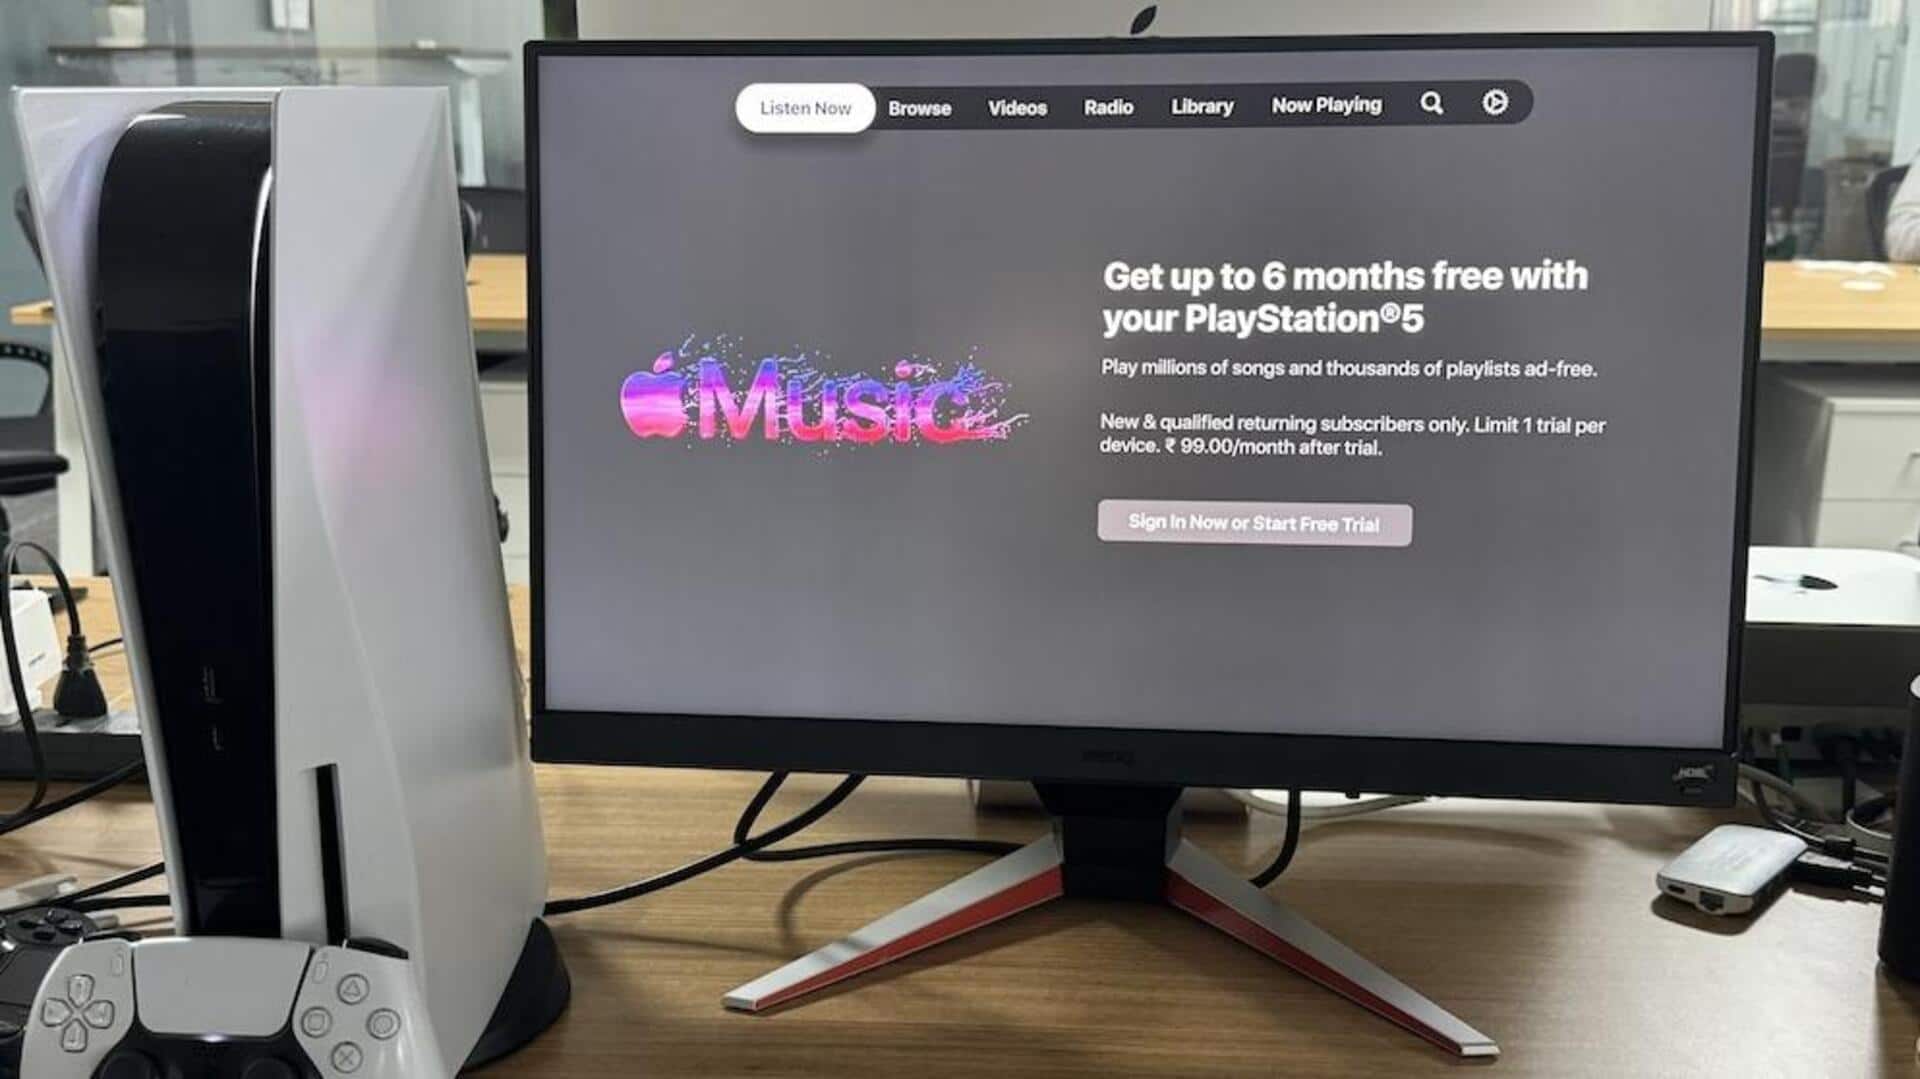 PS5 owners can enjoy free Apple Music for 6 months